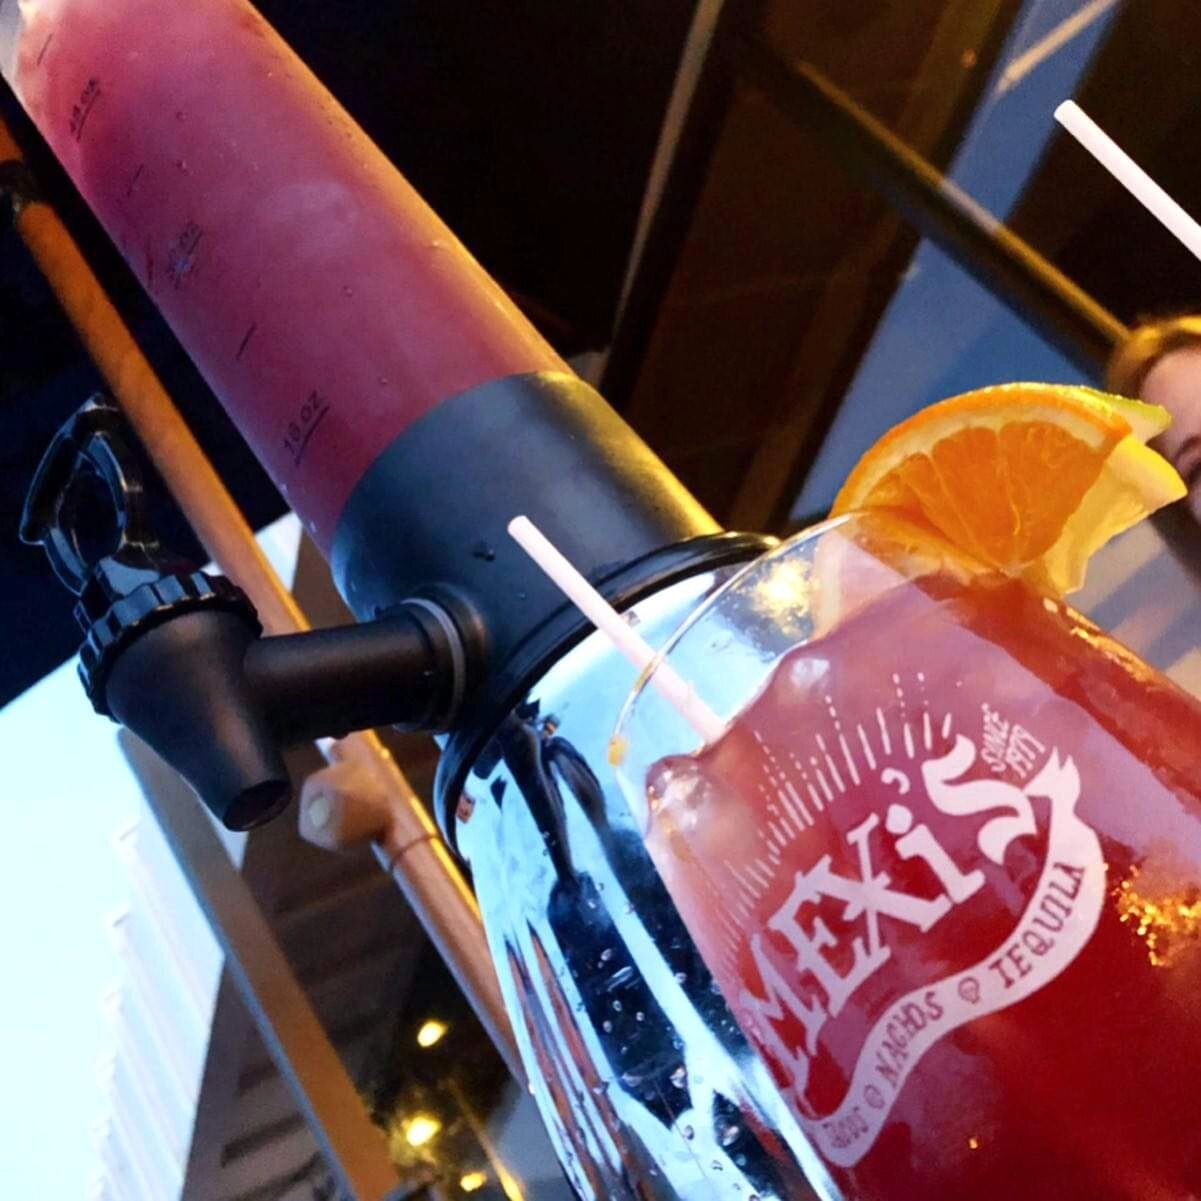 Make the most of your weekend and enjoy $5 off each mouth-watering Sangria Tower you order all day long. 🍷🎉

Book your table now via https://bit.ly/3nsBXL8